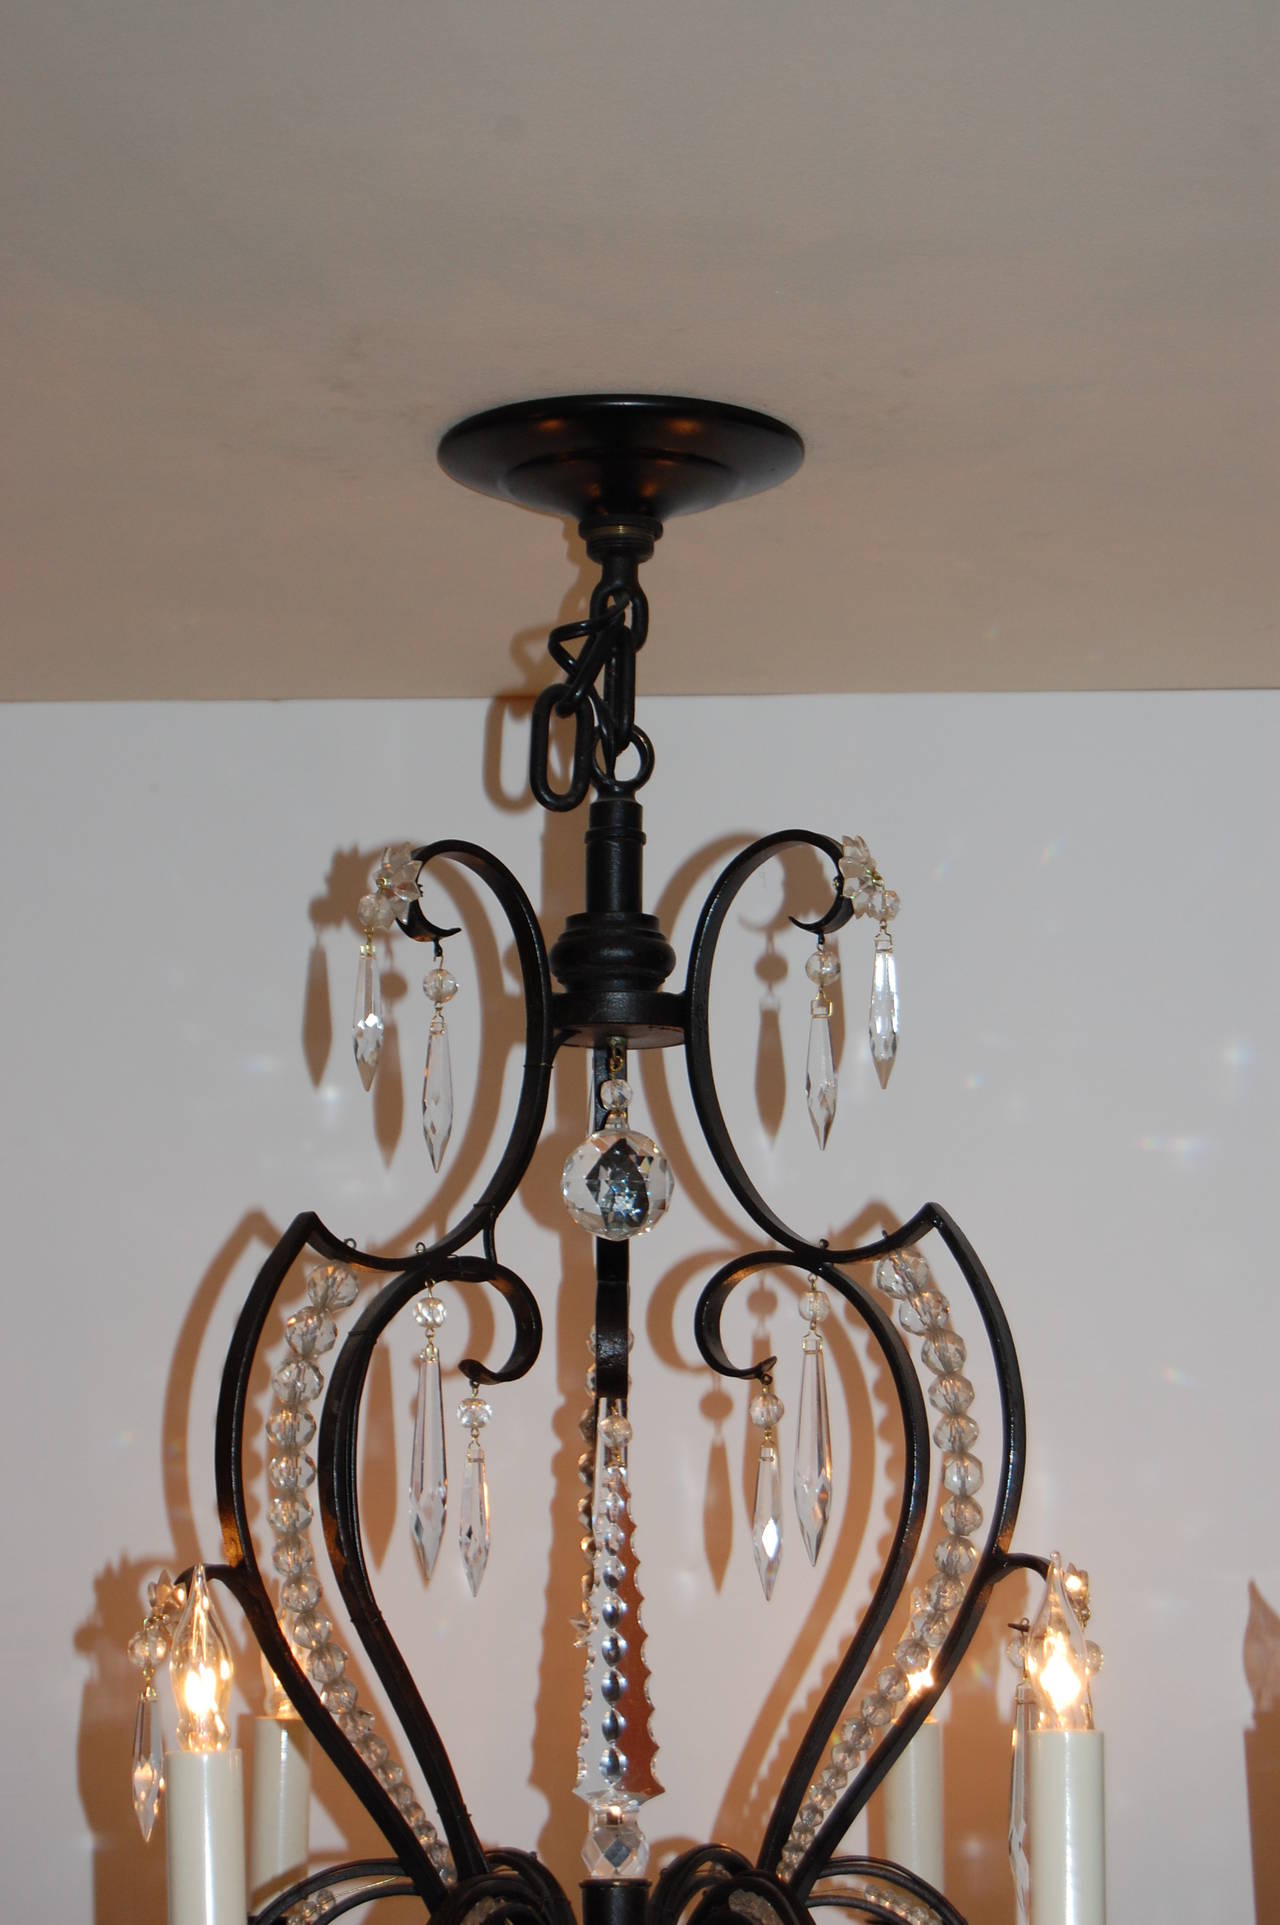 Art Deco Iron and Crystal Six-Light Chandelier, circa 1920s - 1930s For Sale